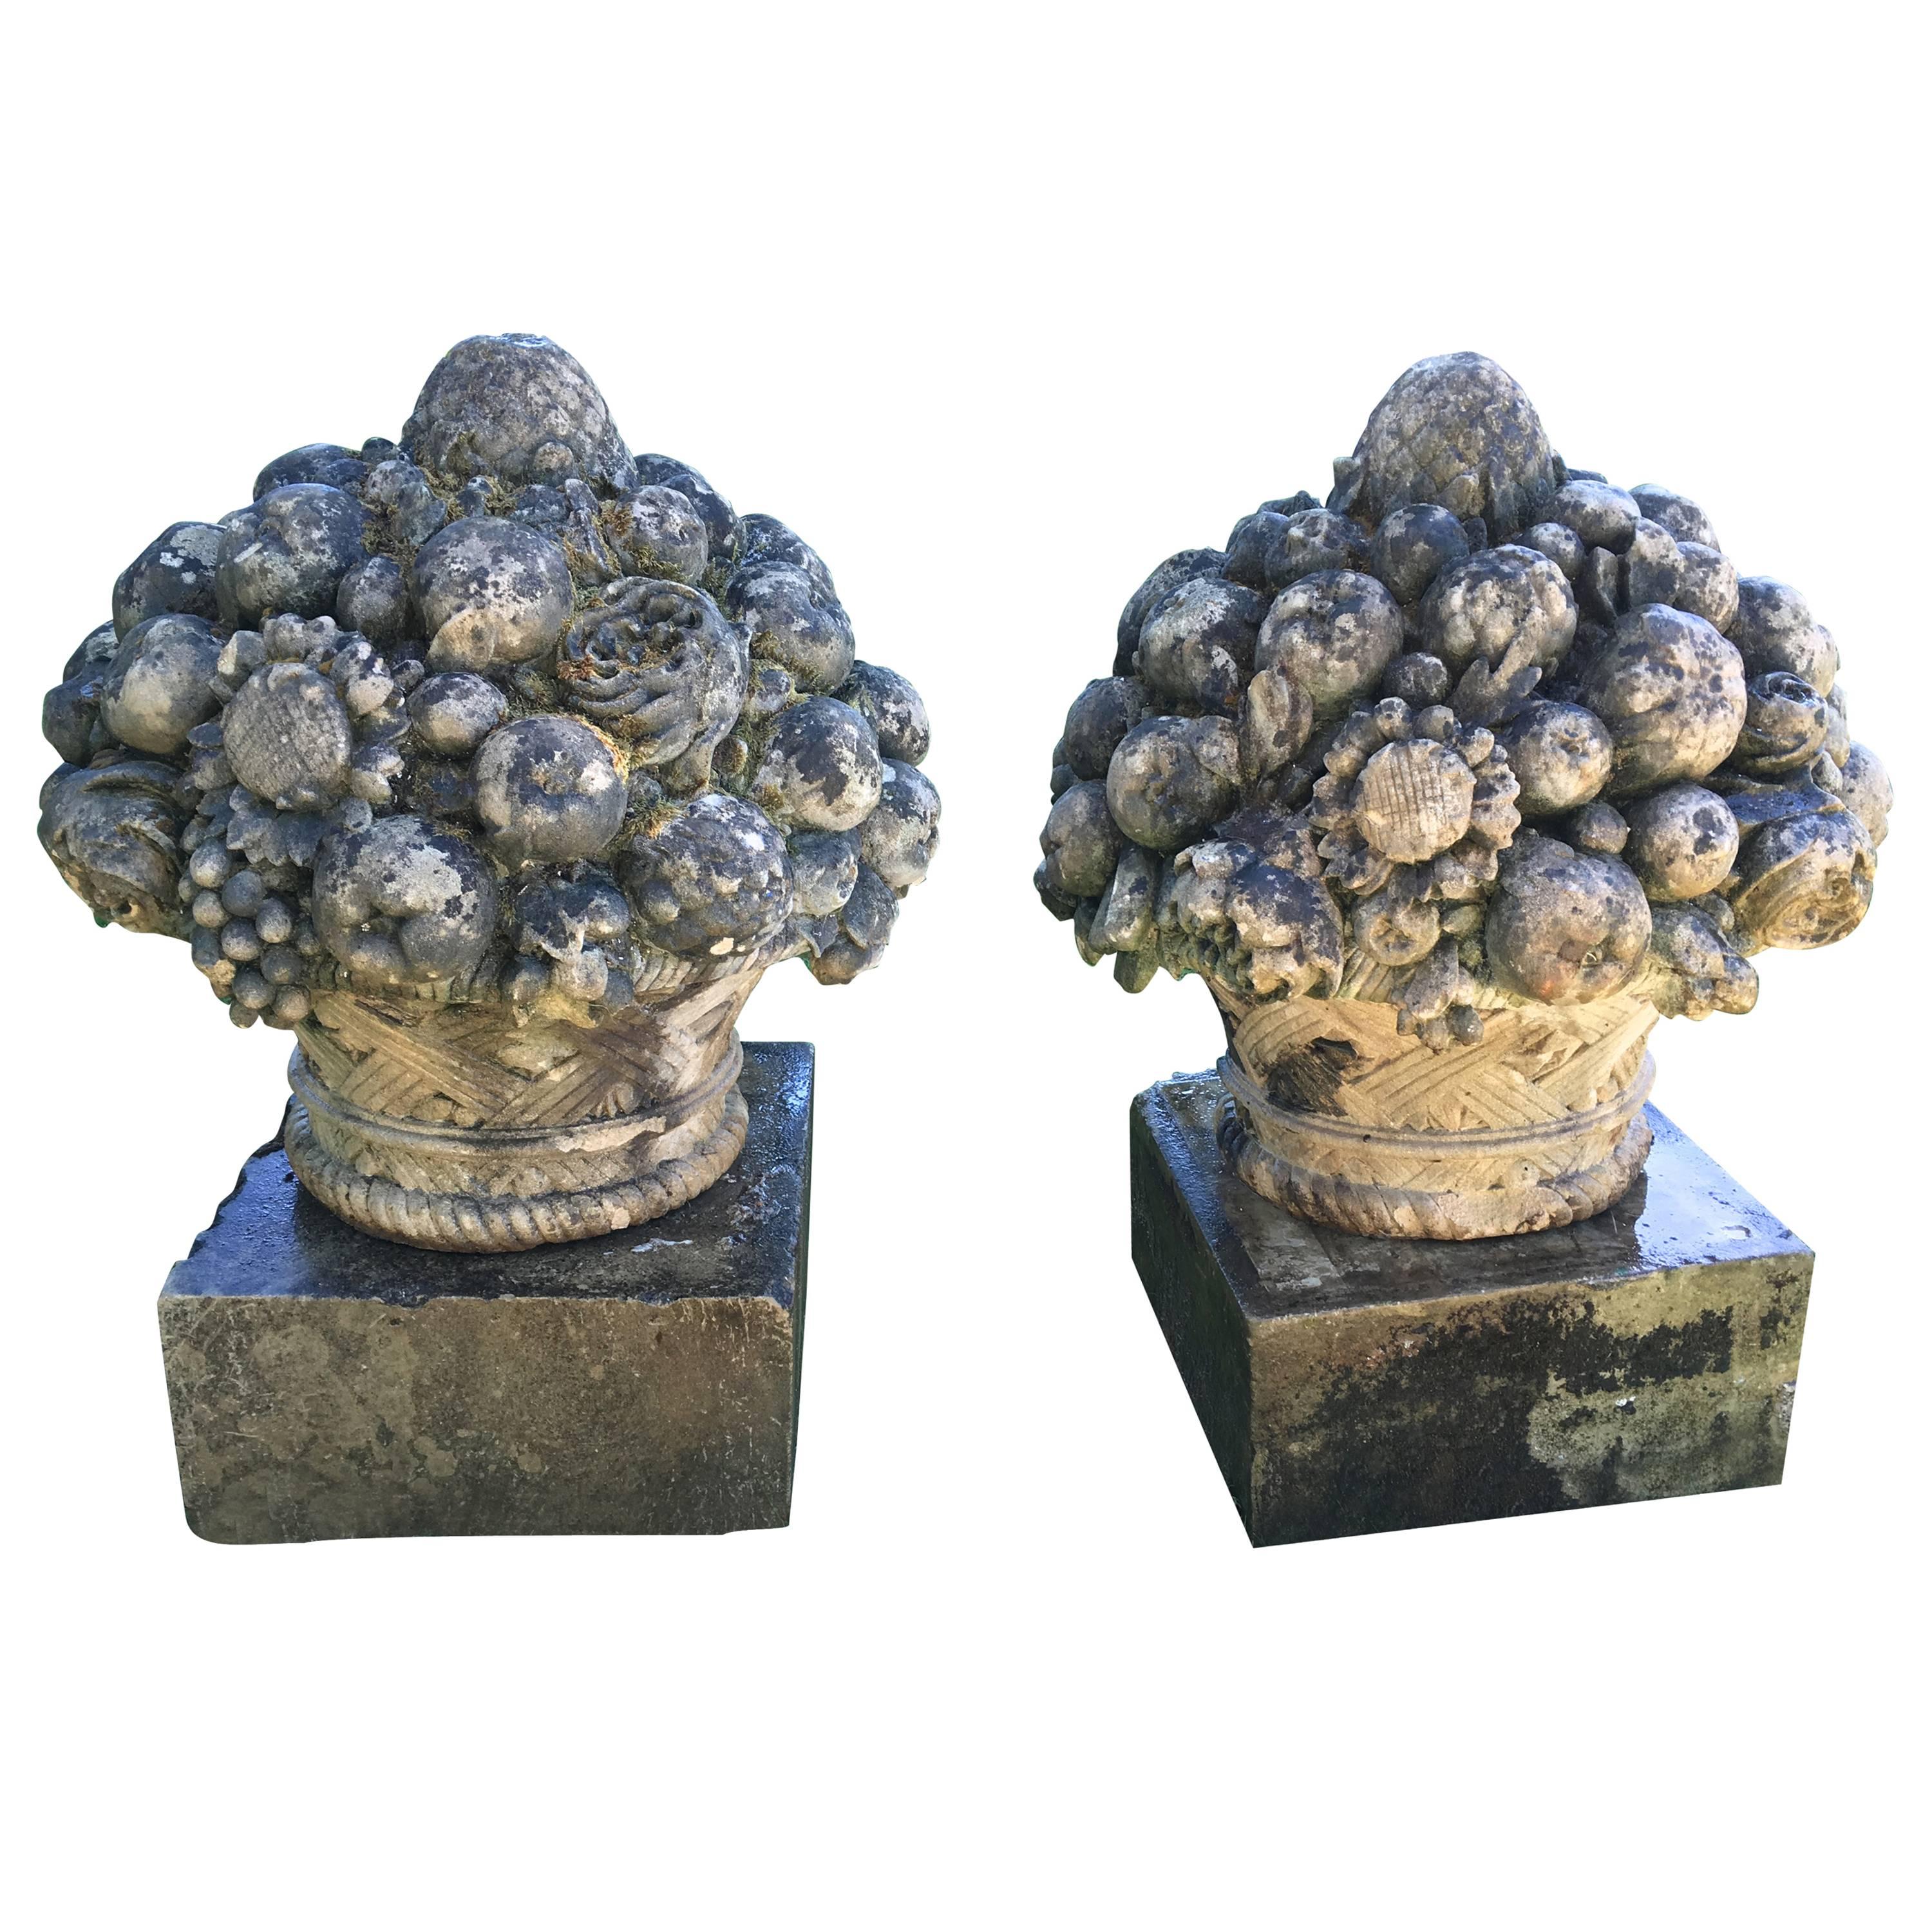 Magnificent Pair of Chateau-Sized Carved Stone Fruit and Flower Baskets